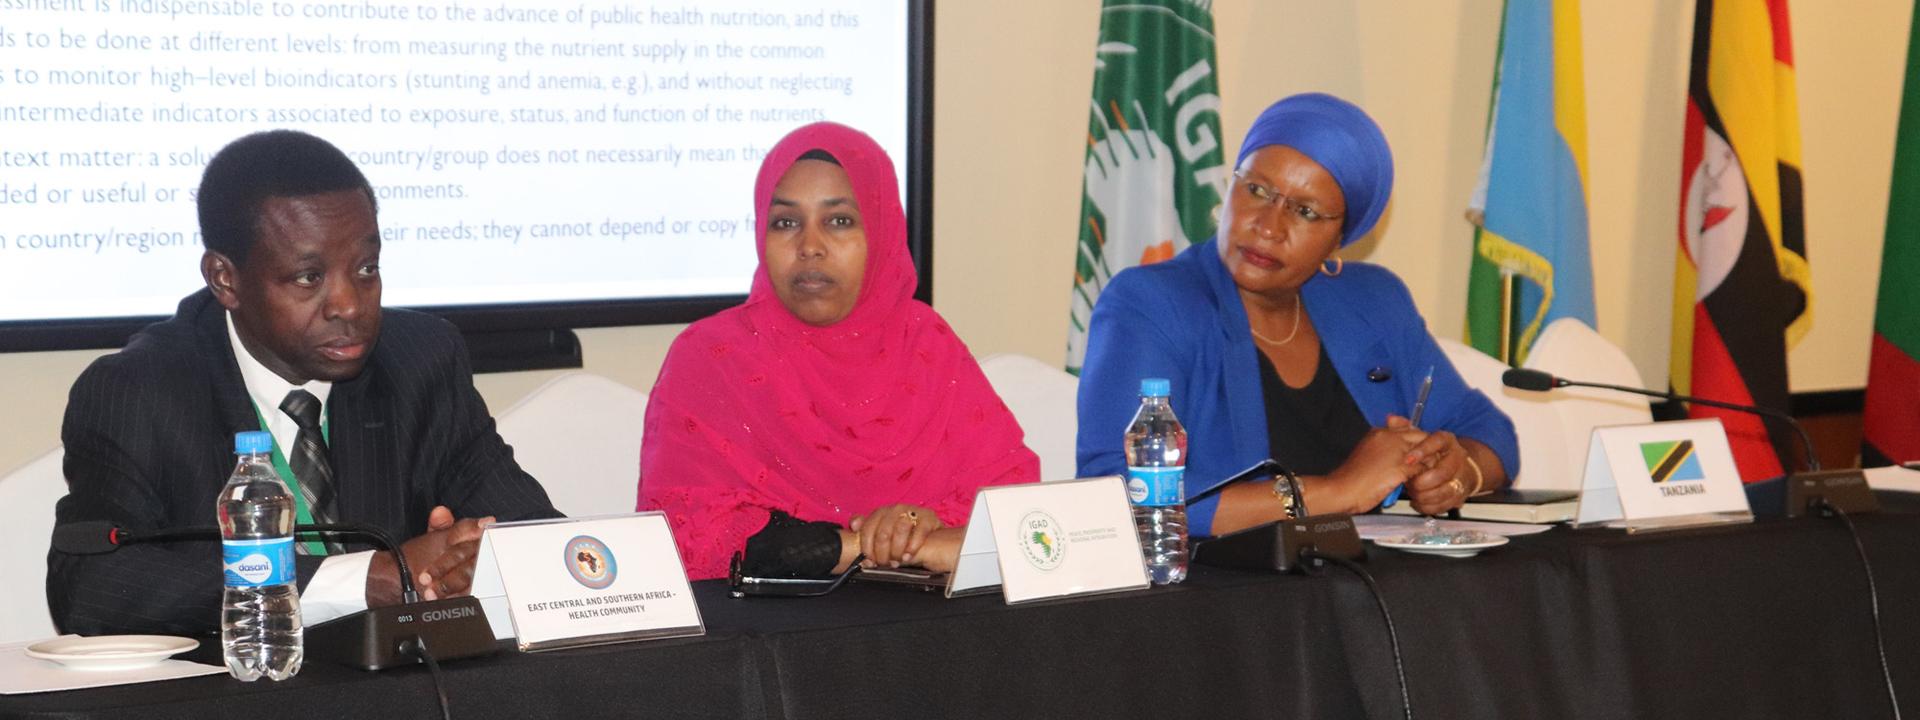 IGAD and ECSA-HC Call for Concerted Efforts to Translate Data and Evidence into Policy and Programmes